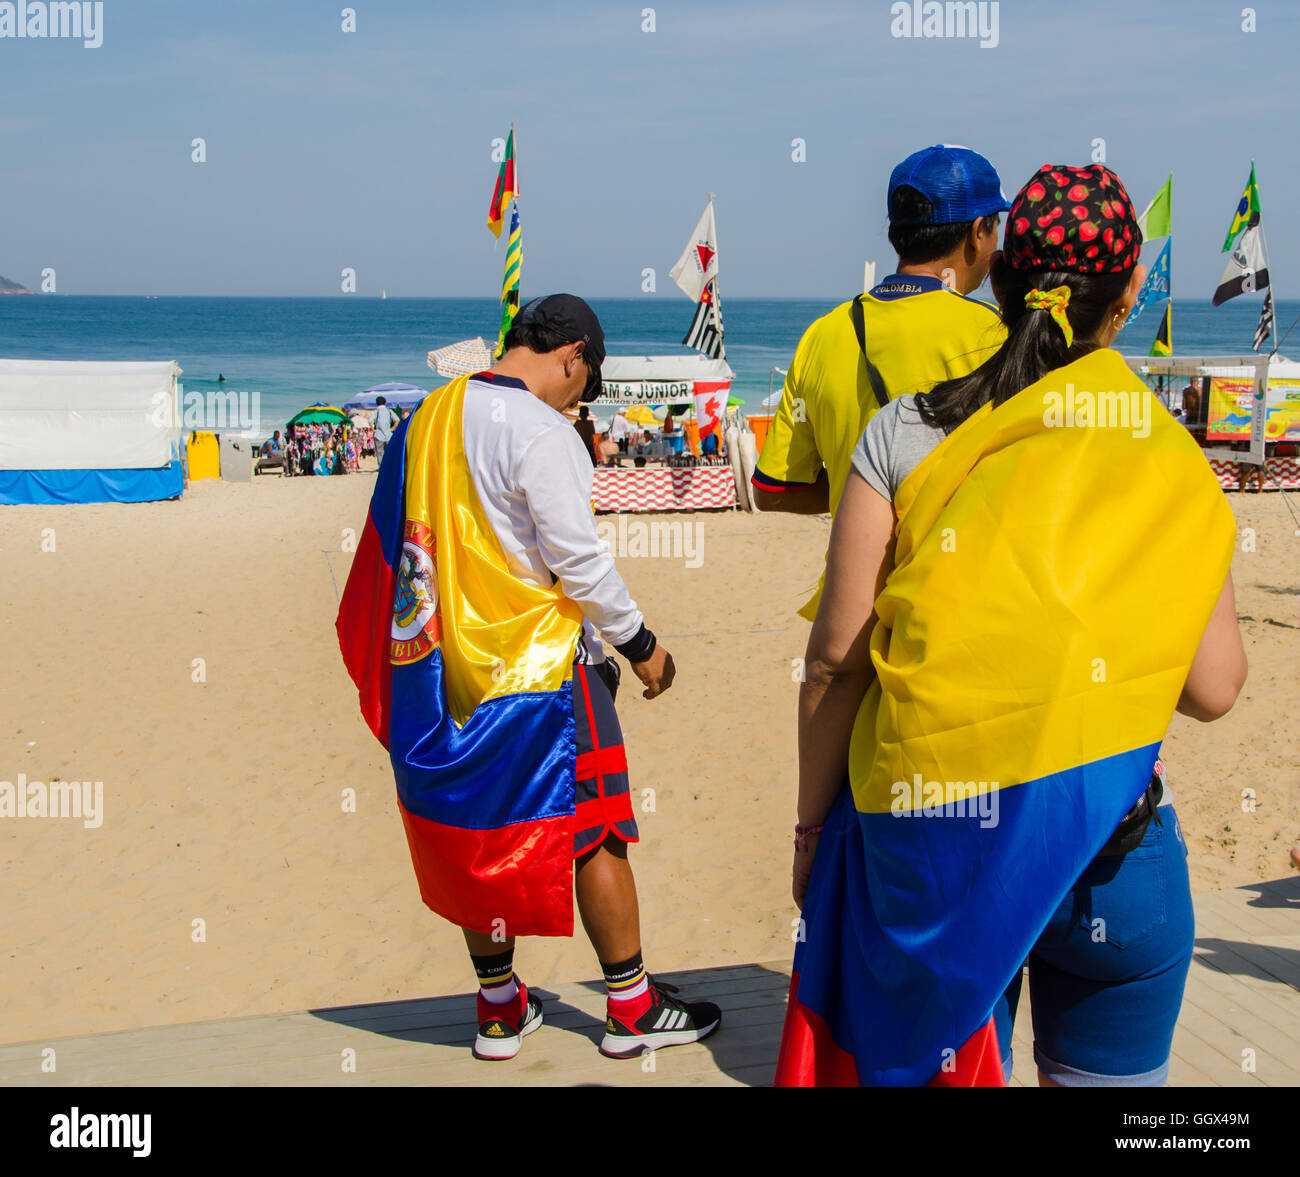 Colombian fans enjoy a day out on Ipanema beach in Rio de Janeiro, Brazil during the Rio 2016 Olympics Stock Photo